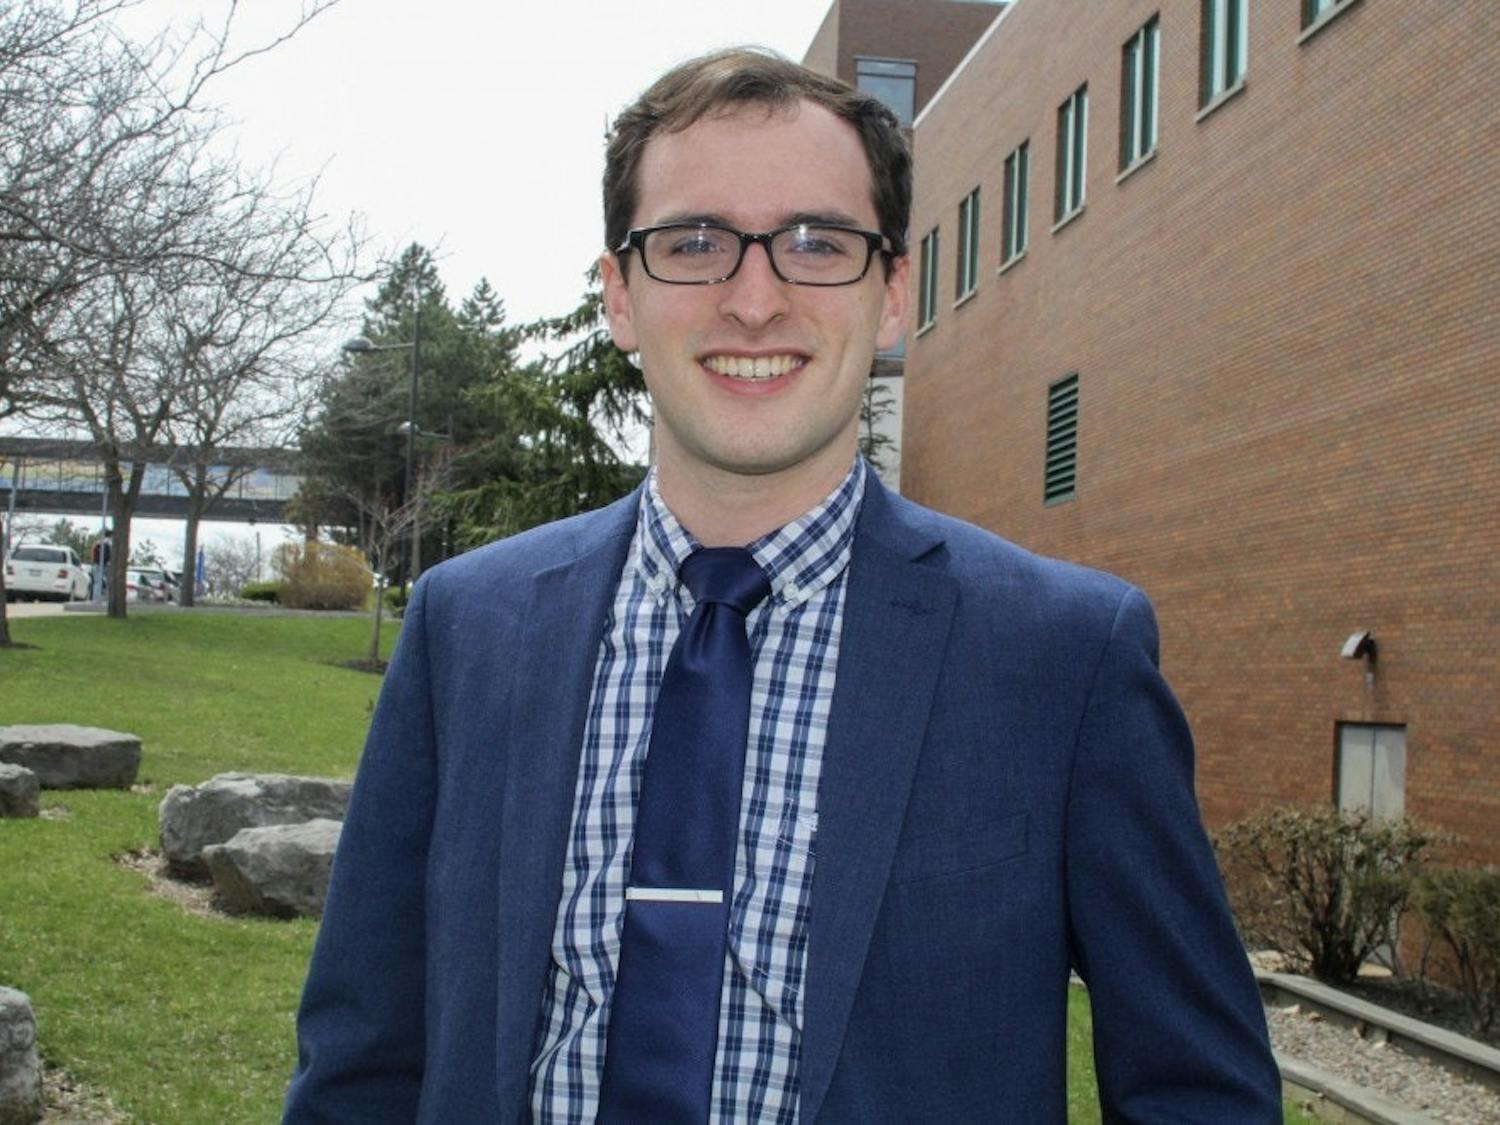 Mike Brown, senior political science and computer science major, will speak at the second arts and science commencement ceremony next week.